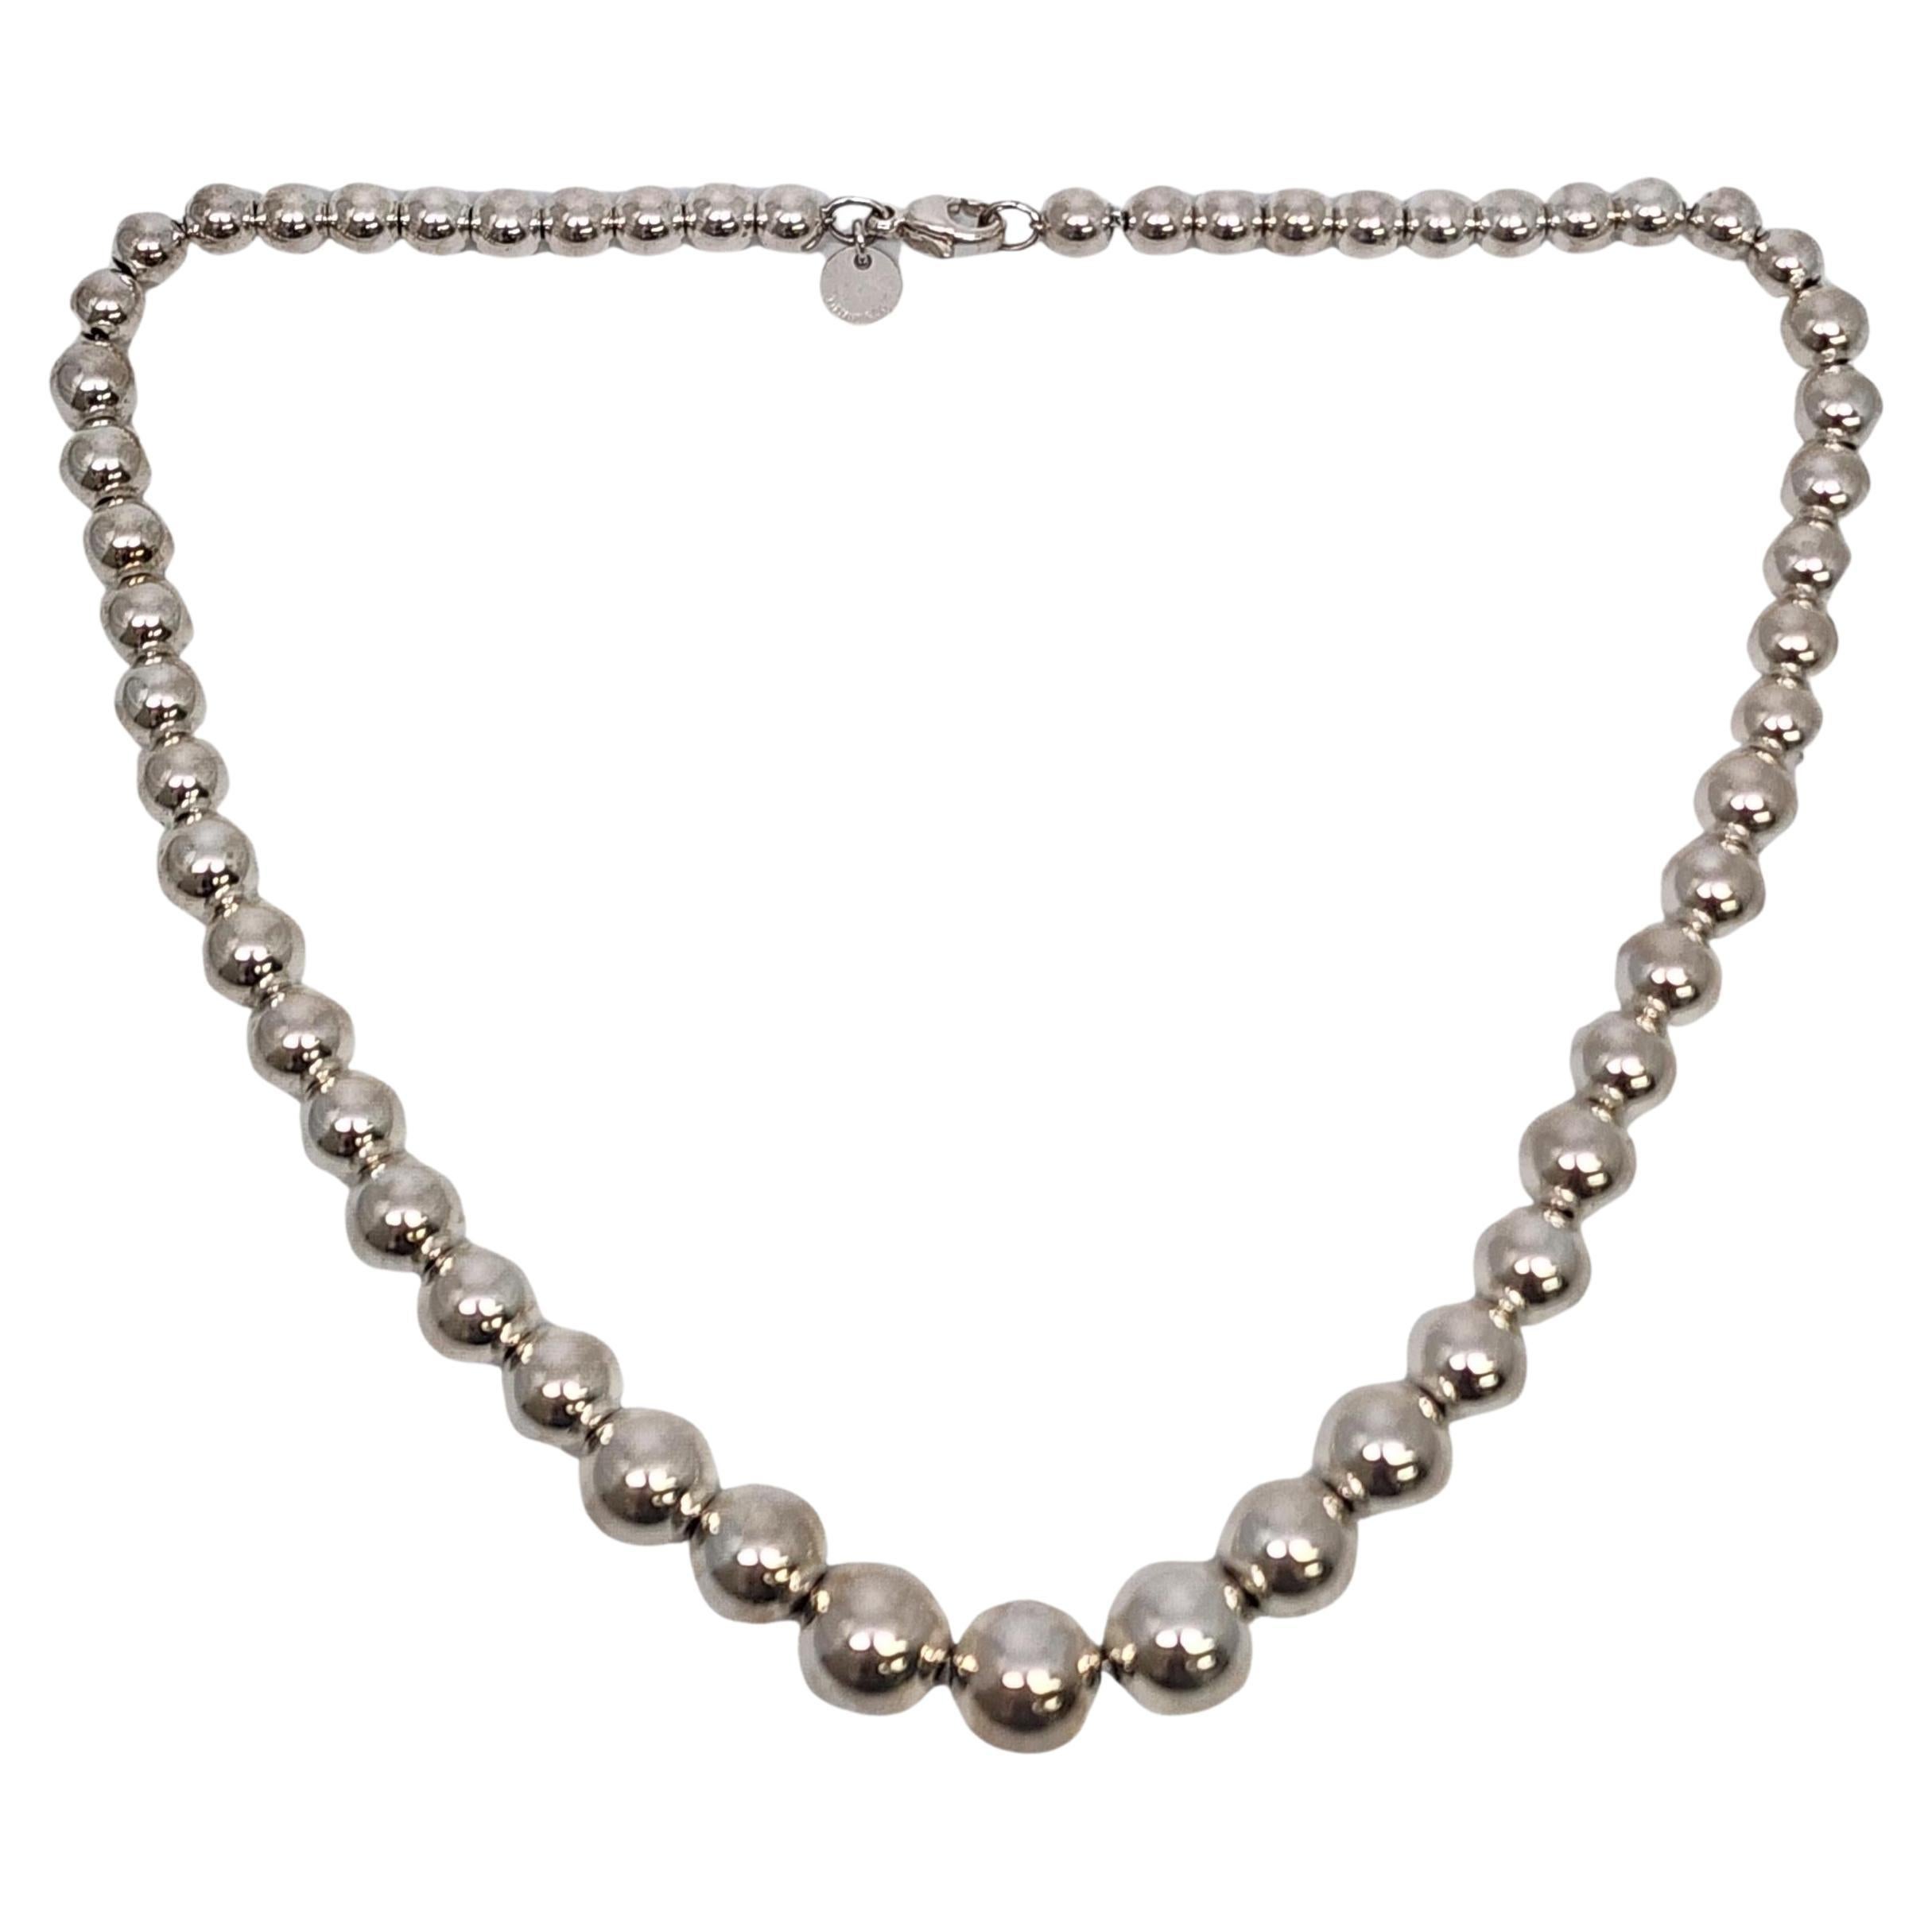 Tiffany & Co Sterling Silver Graduated Ball Bead Necklace 16" #17252 For Sale